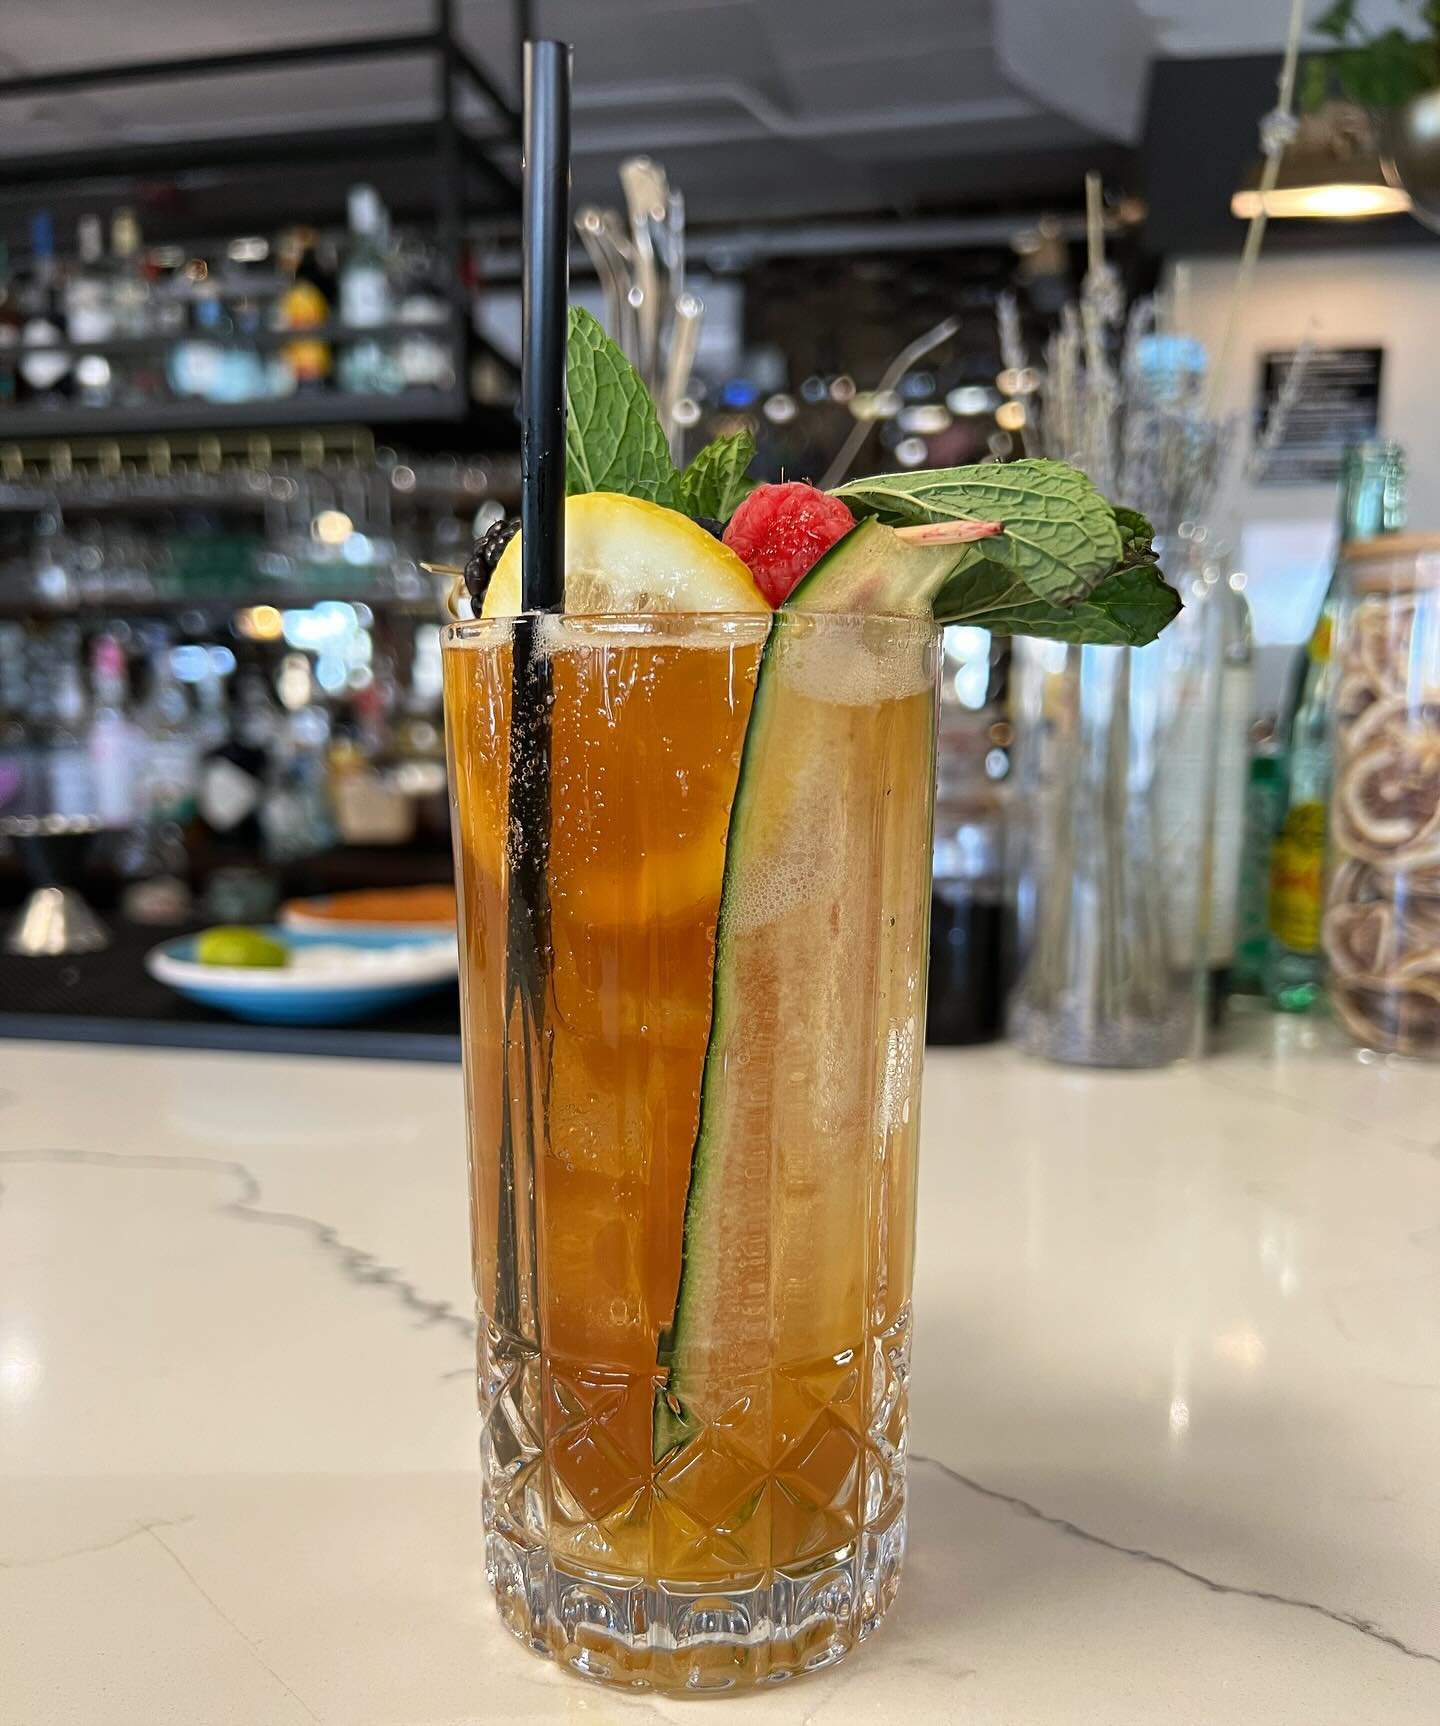 It&rsquo;s Pimm&rsquo;s Cup season! Come enjoy a refreshing beverage on our climate controlled patio! Sip on one of our craft or zero-proof cocktails, or try our selection of beers, wines and delicious coffee drinks.